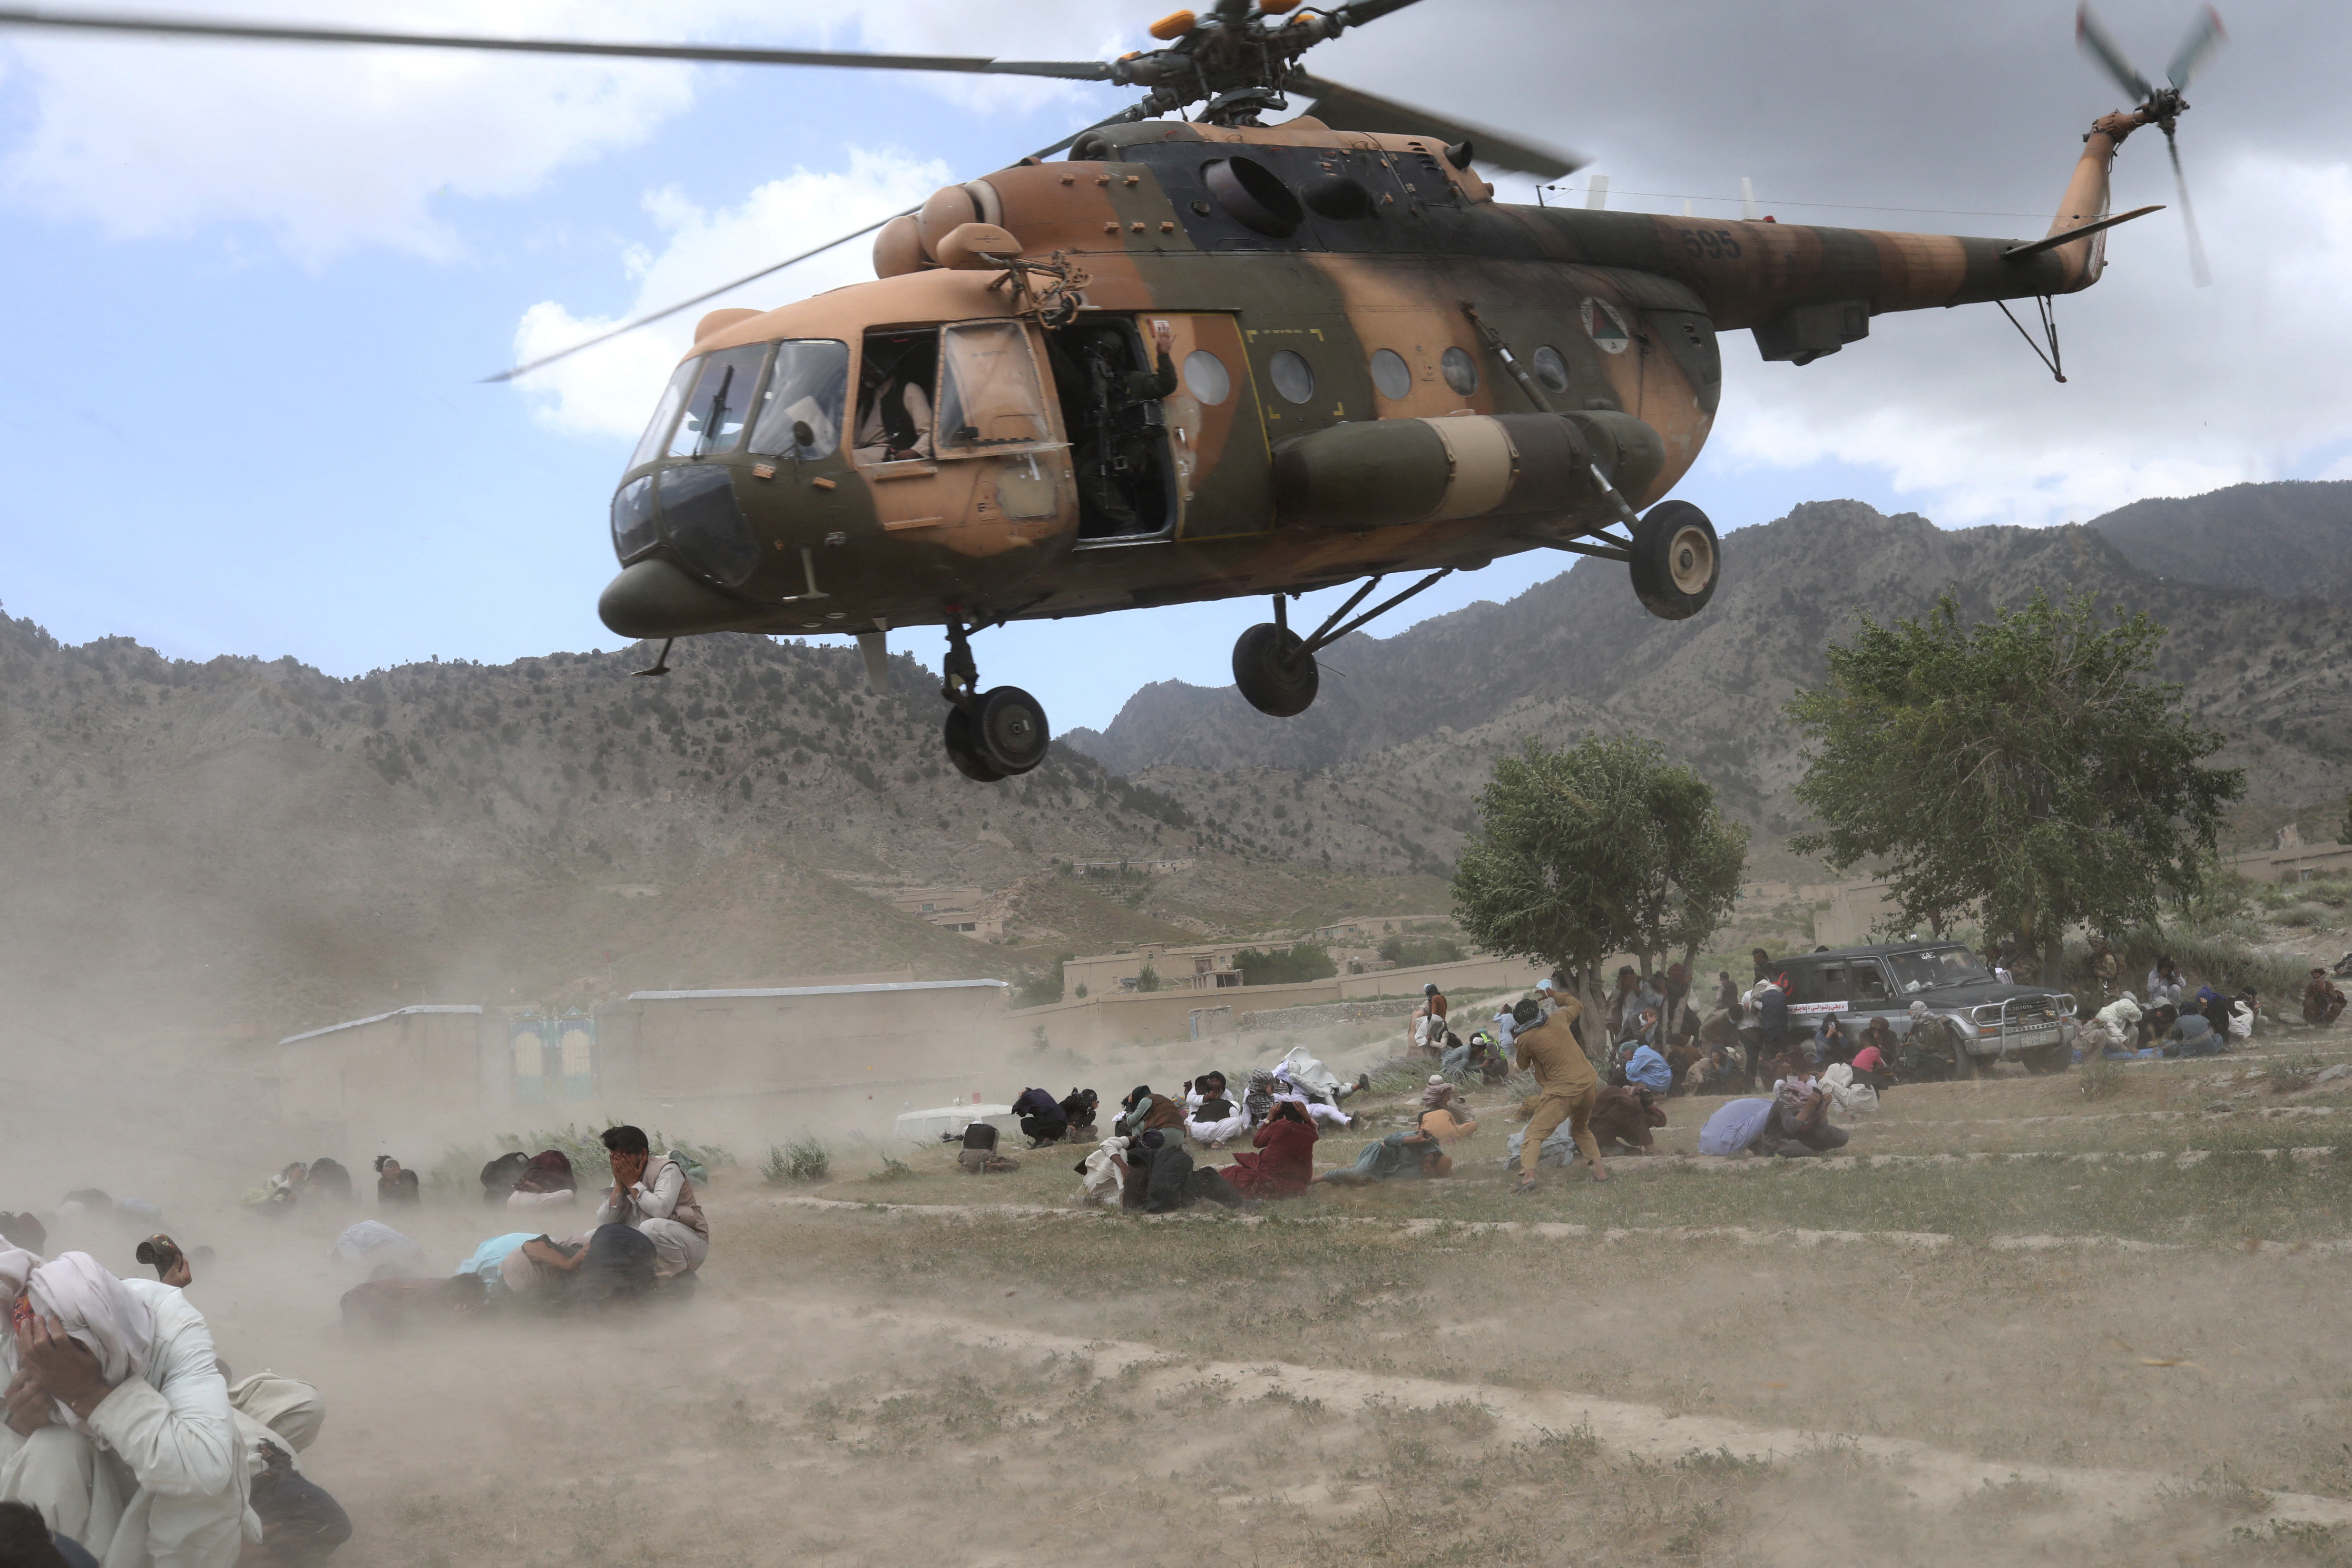 A Taliban helicopter takes off after bringing aid to an area affected by an earthquake in Gayan